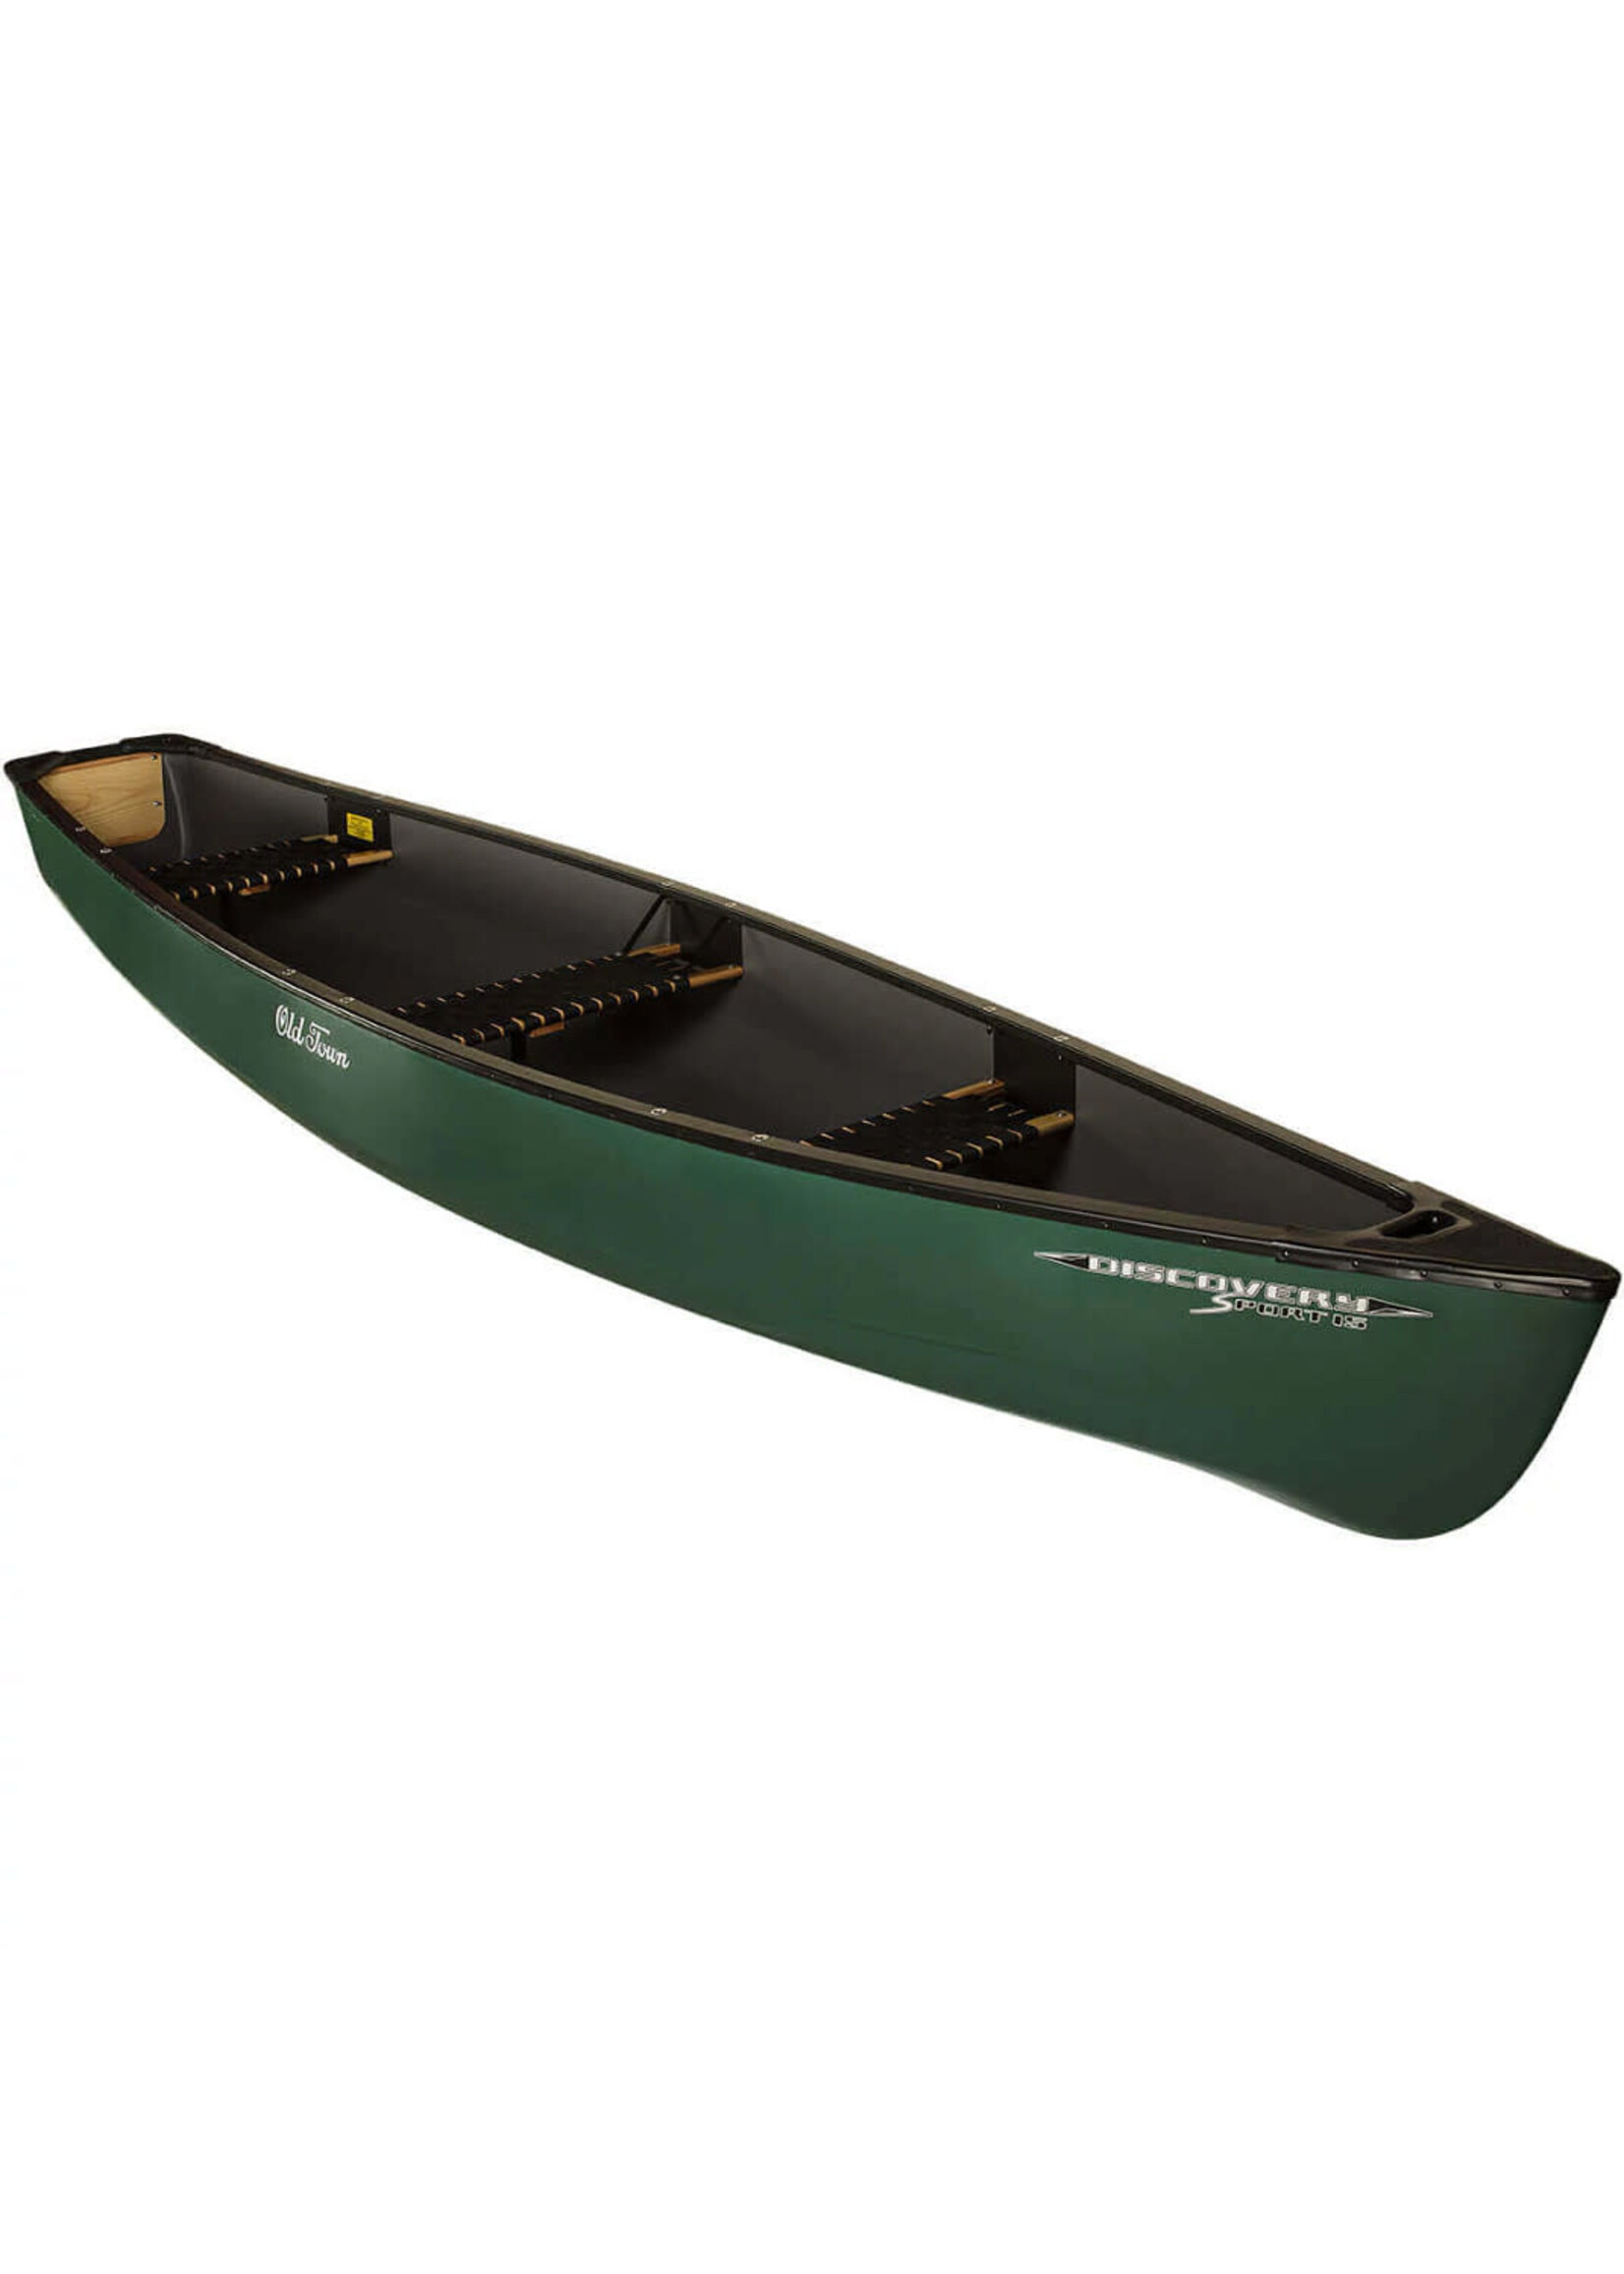 Johnson Outdoors Discovery SPORT 15 Green : 01.3012.0160